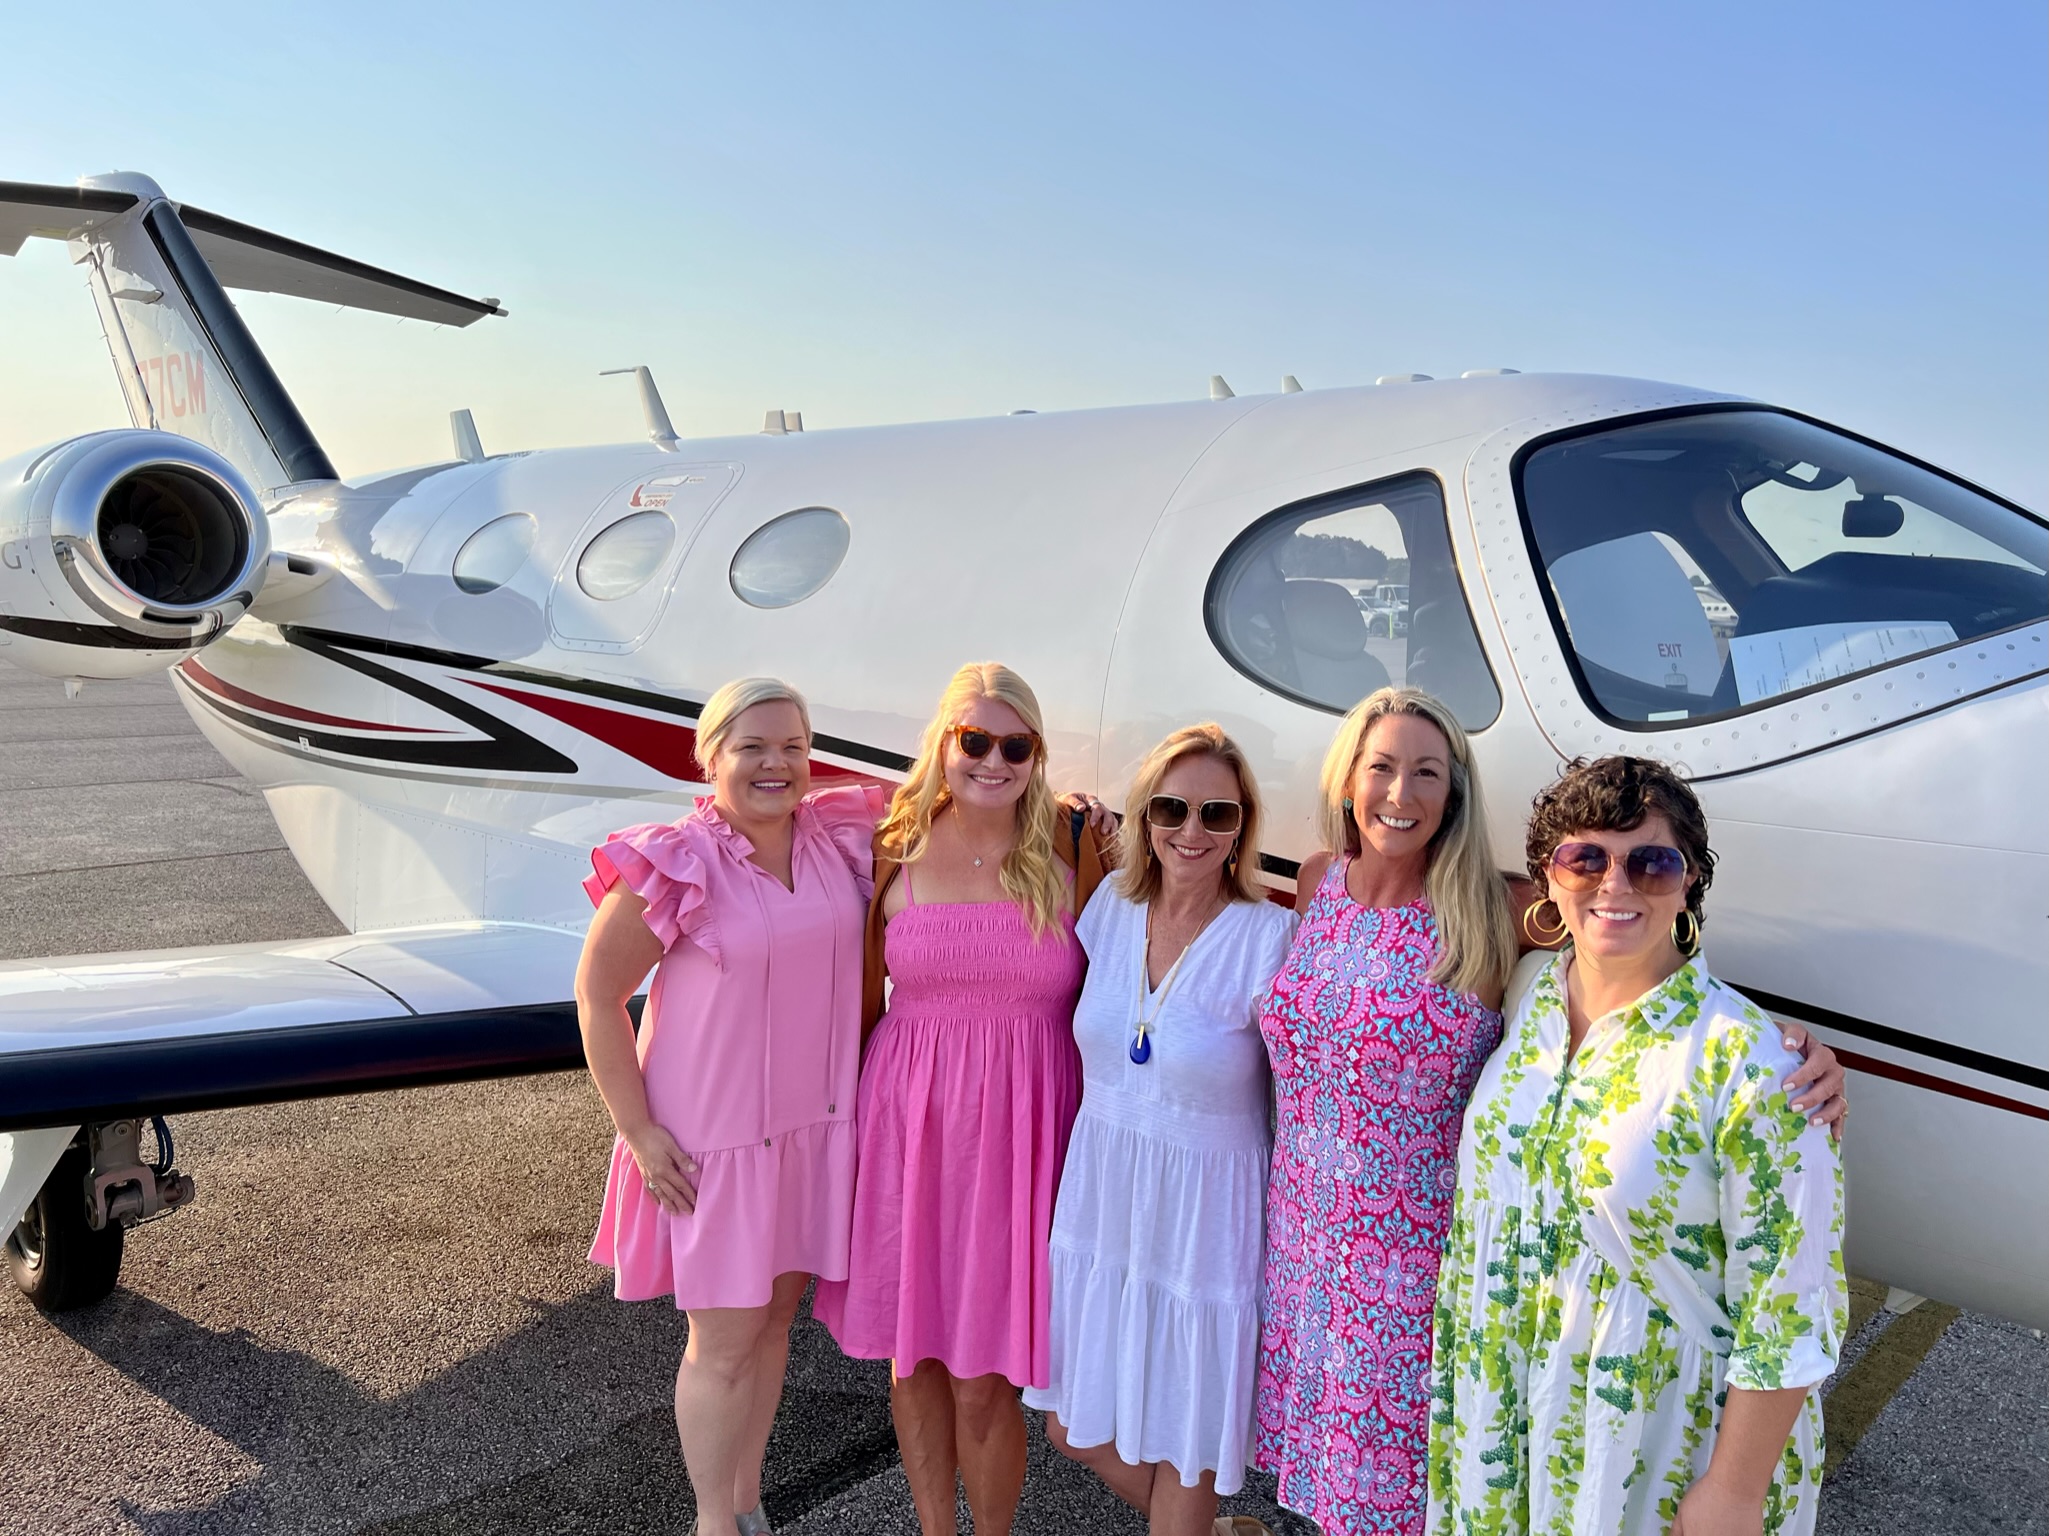 Jet-Setting Adventures: A Spontaneous Girls' Trip with Executive Aviation Group